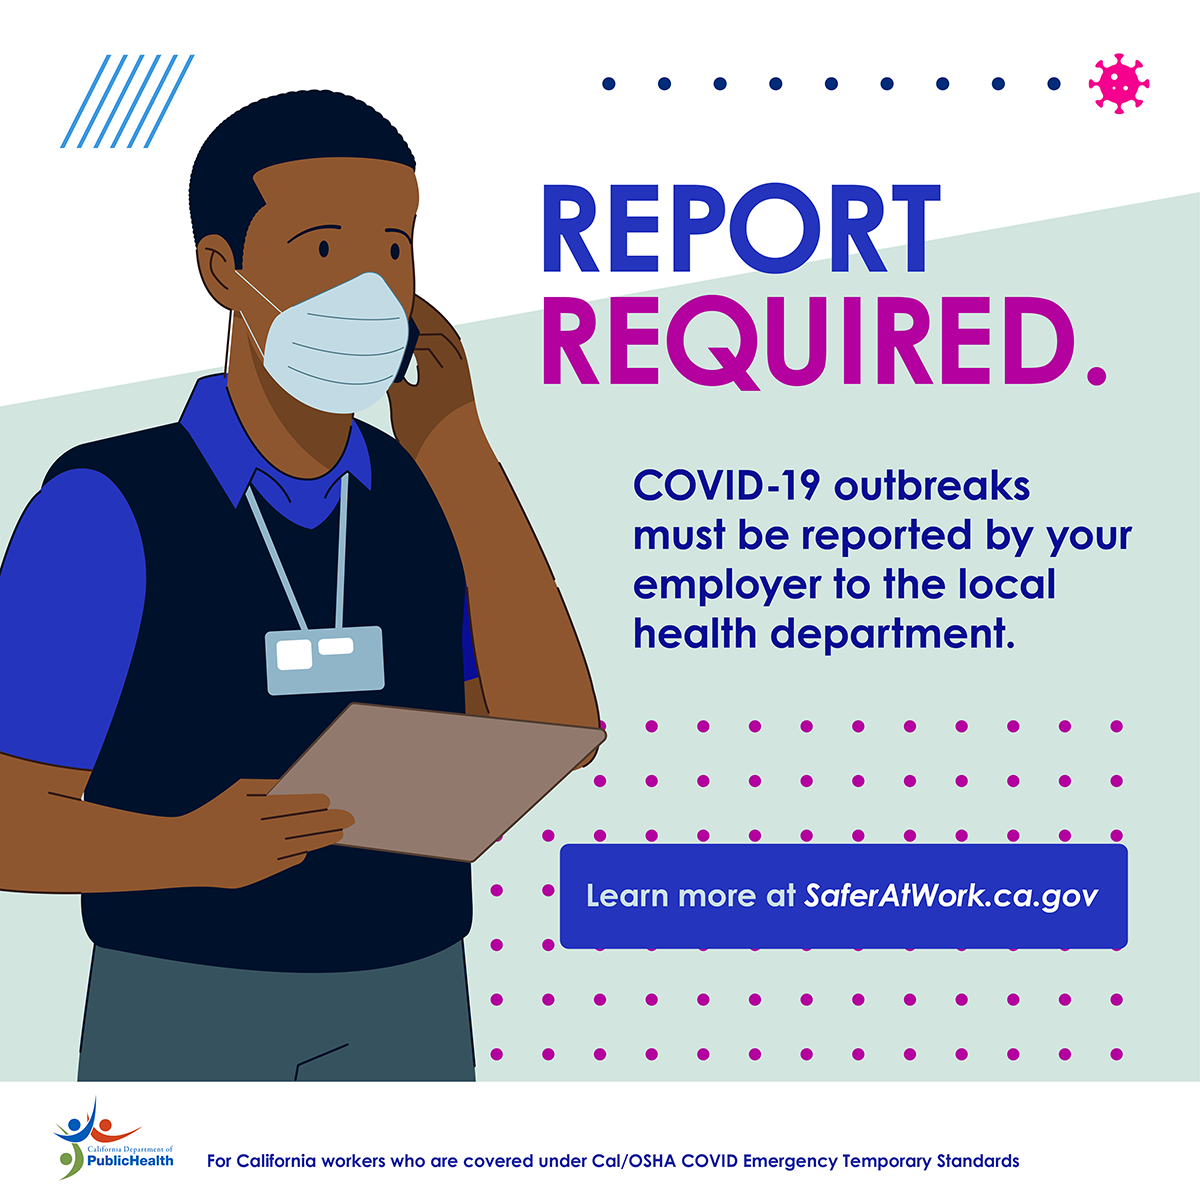 Report required. COVID-19 outbreaks must be reported by your employer to the local health department.